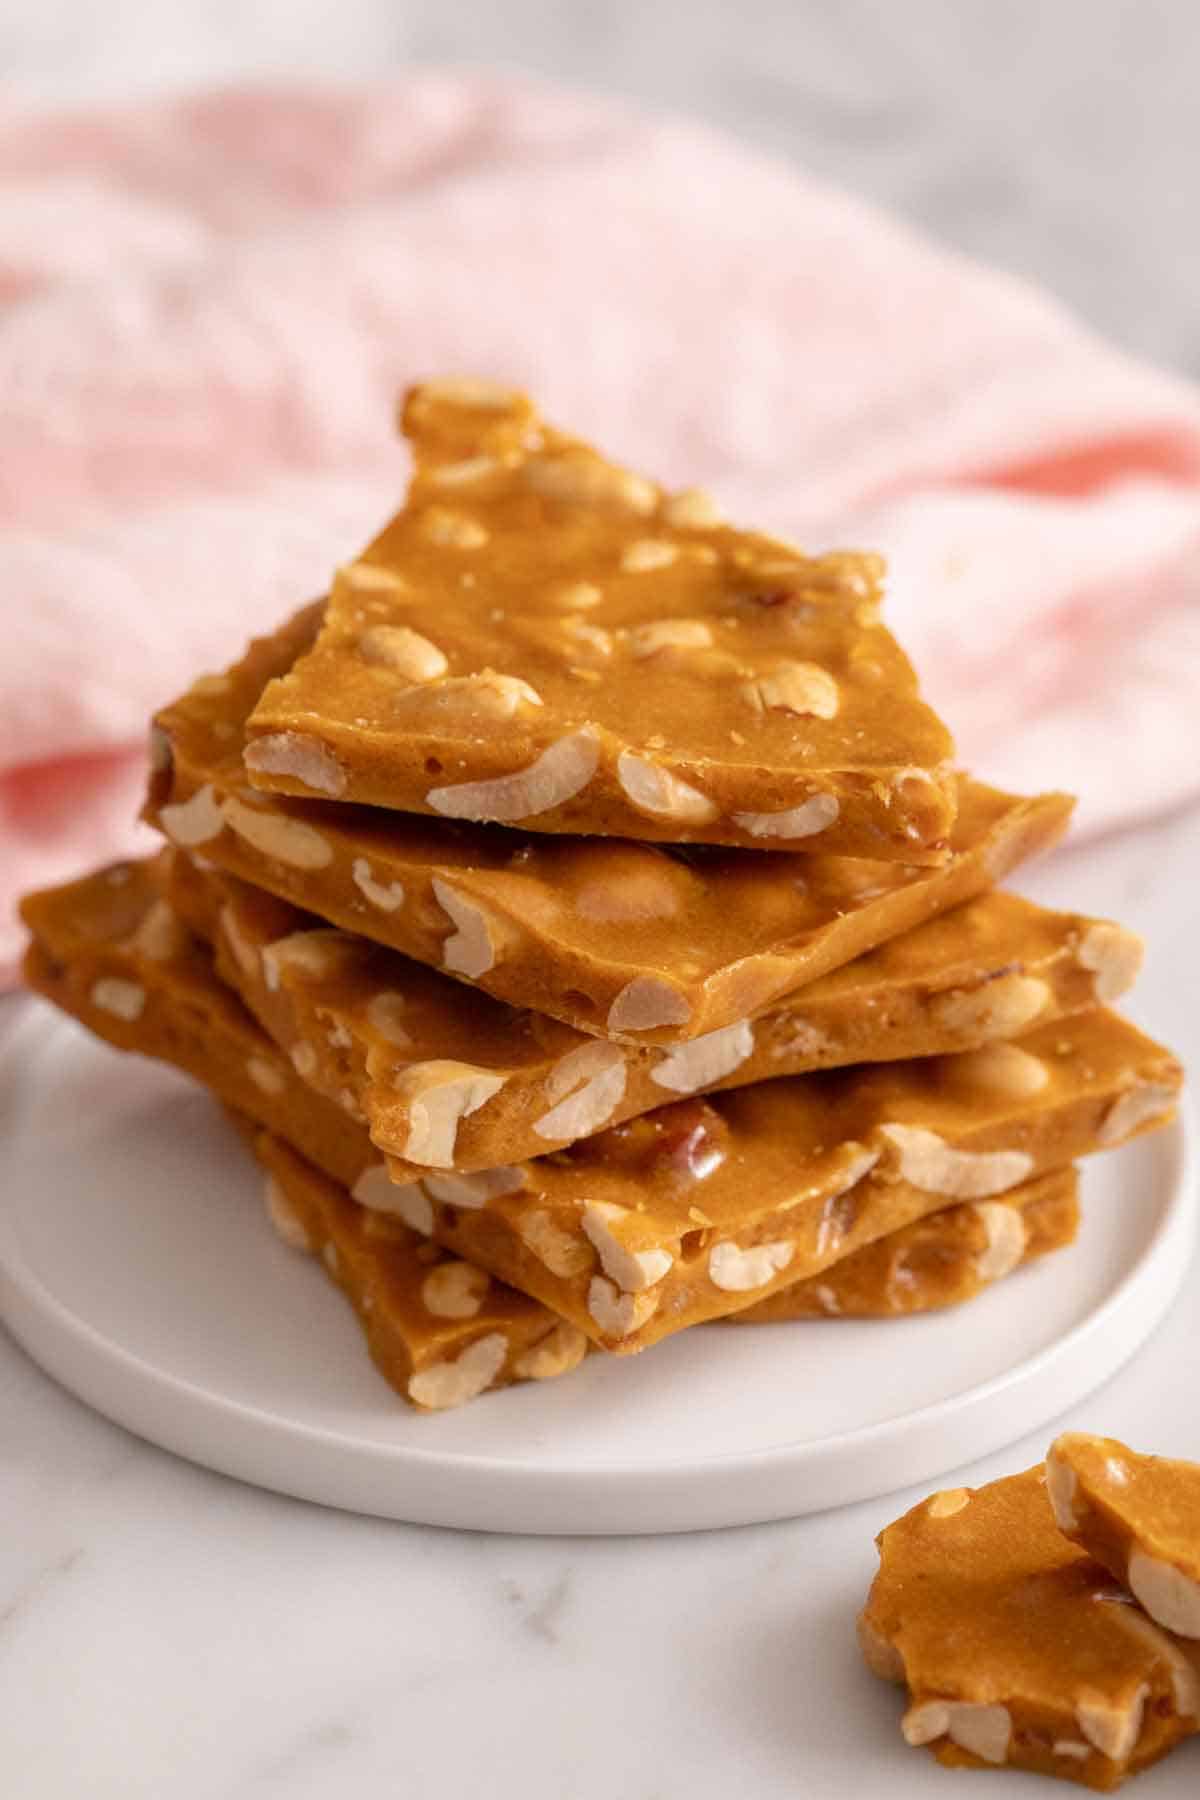 A plate with a stack of peanut brittle.